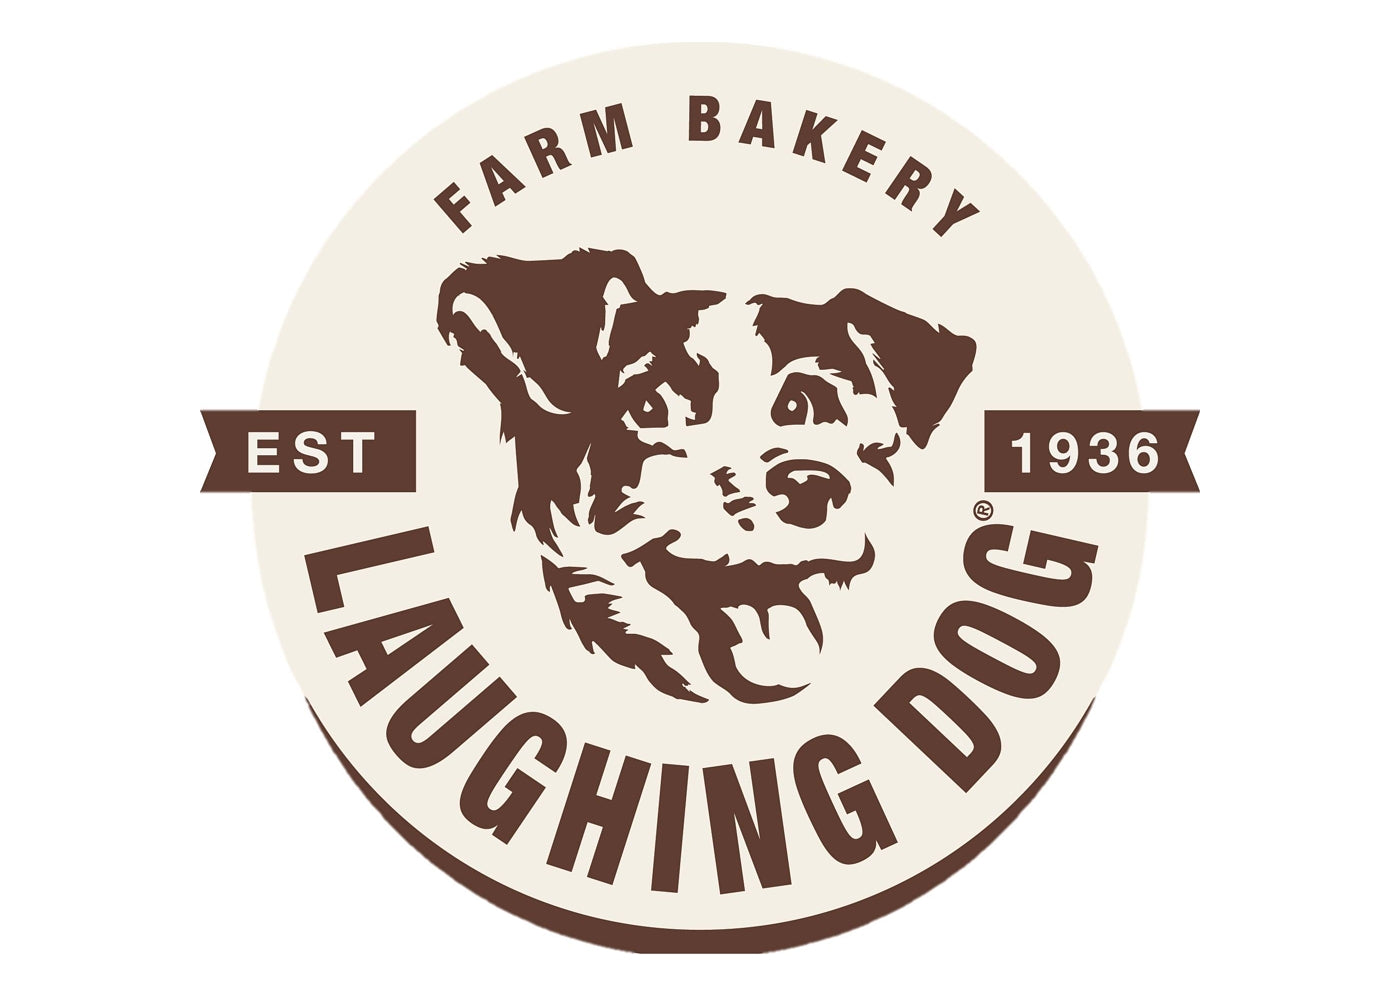 Laughing Dog - Wheat Free Baked Mixer Meal for Dogs